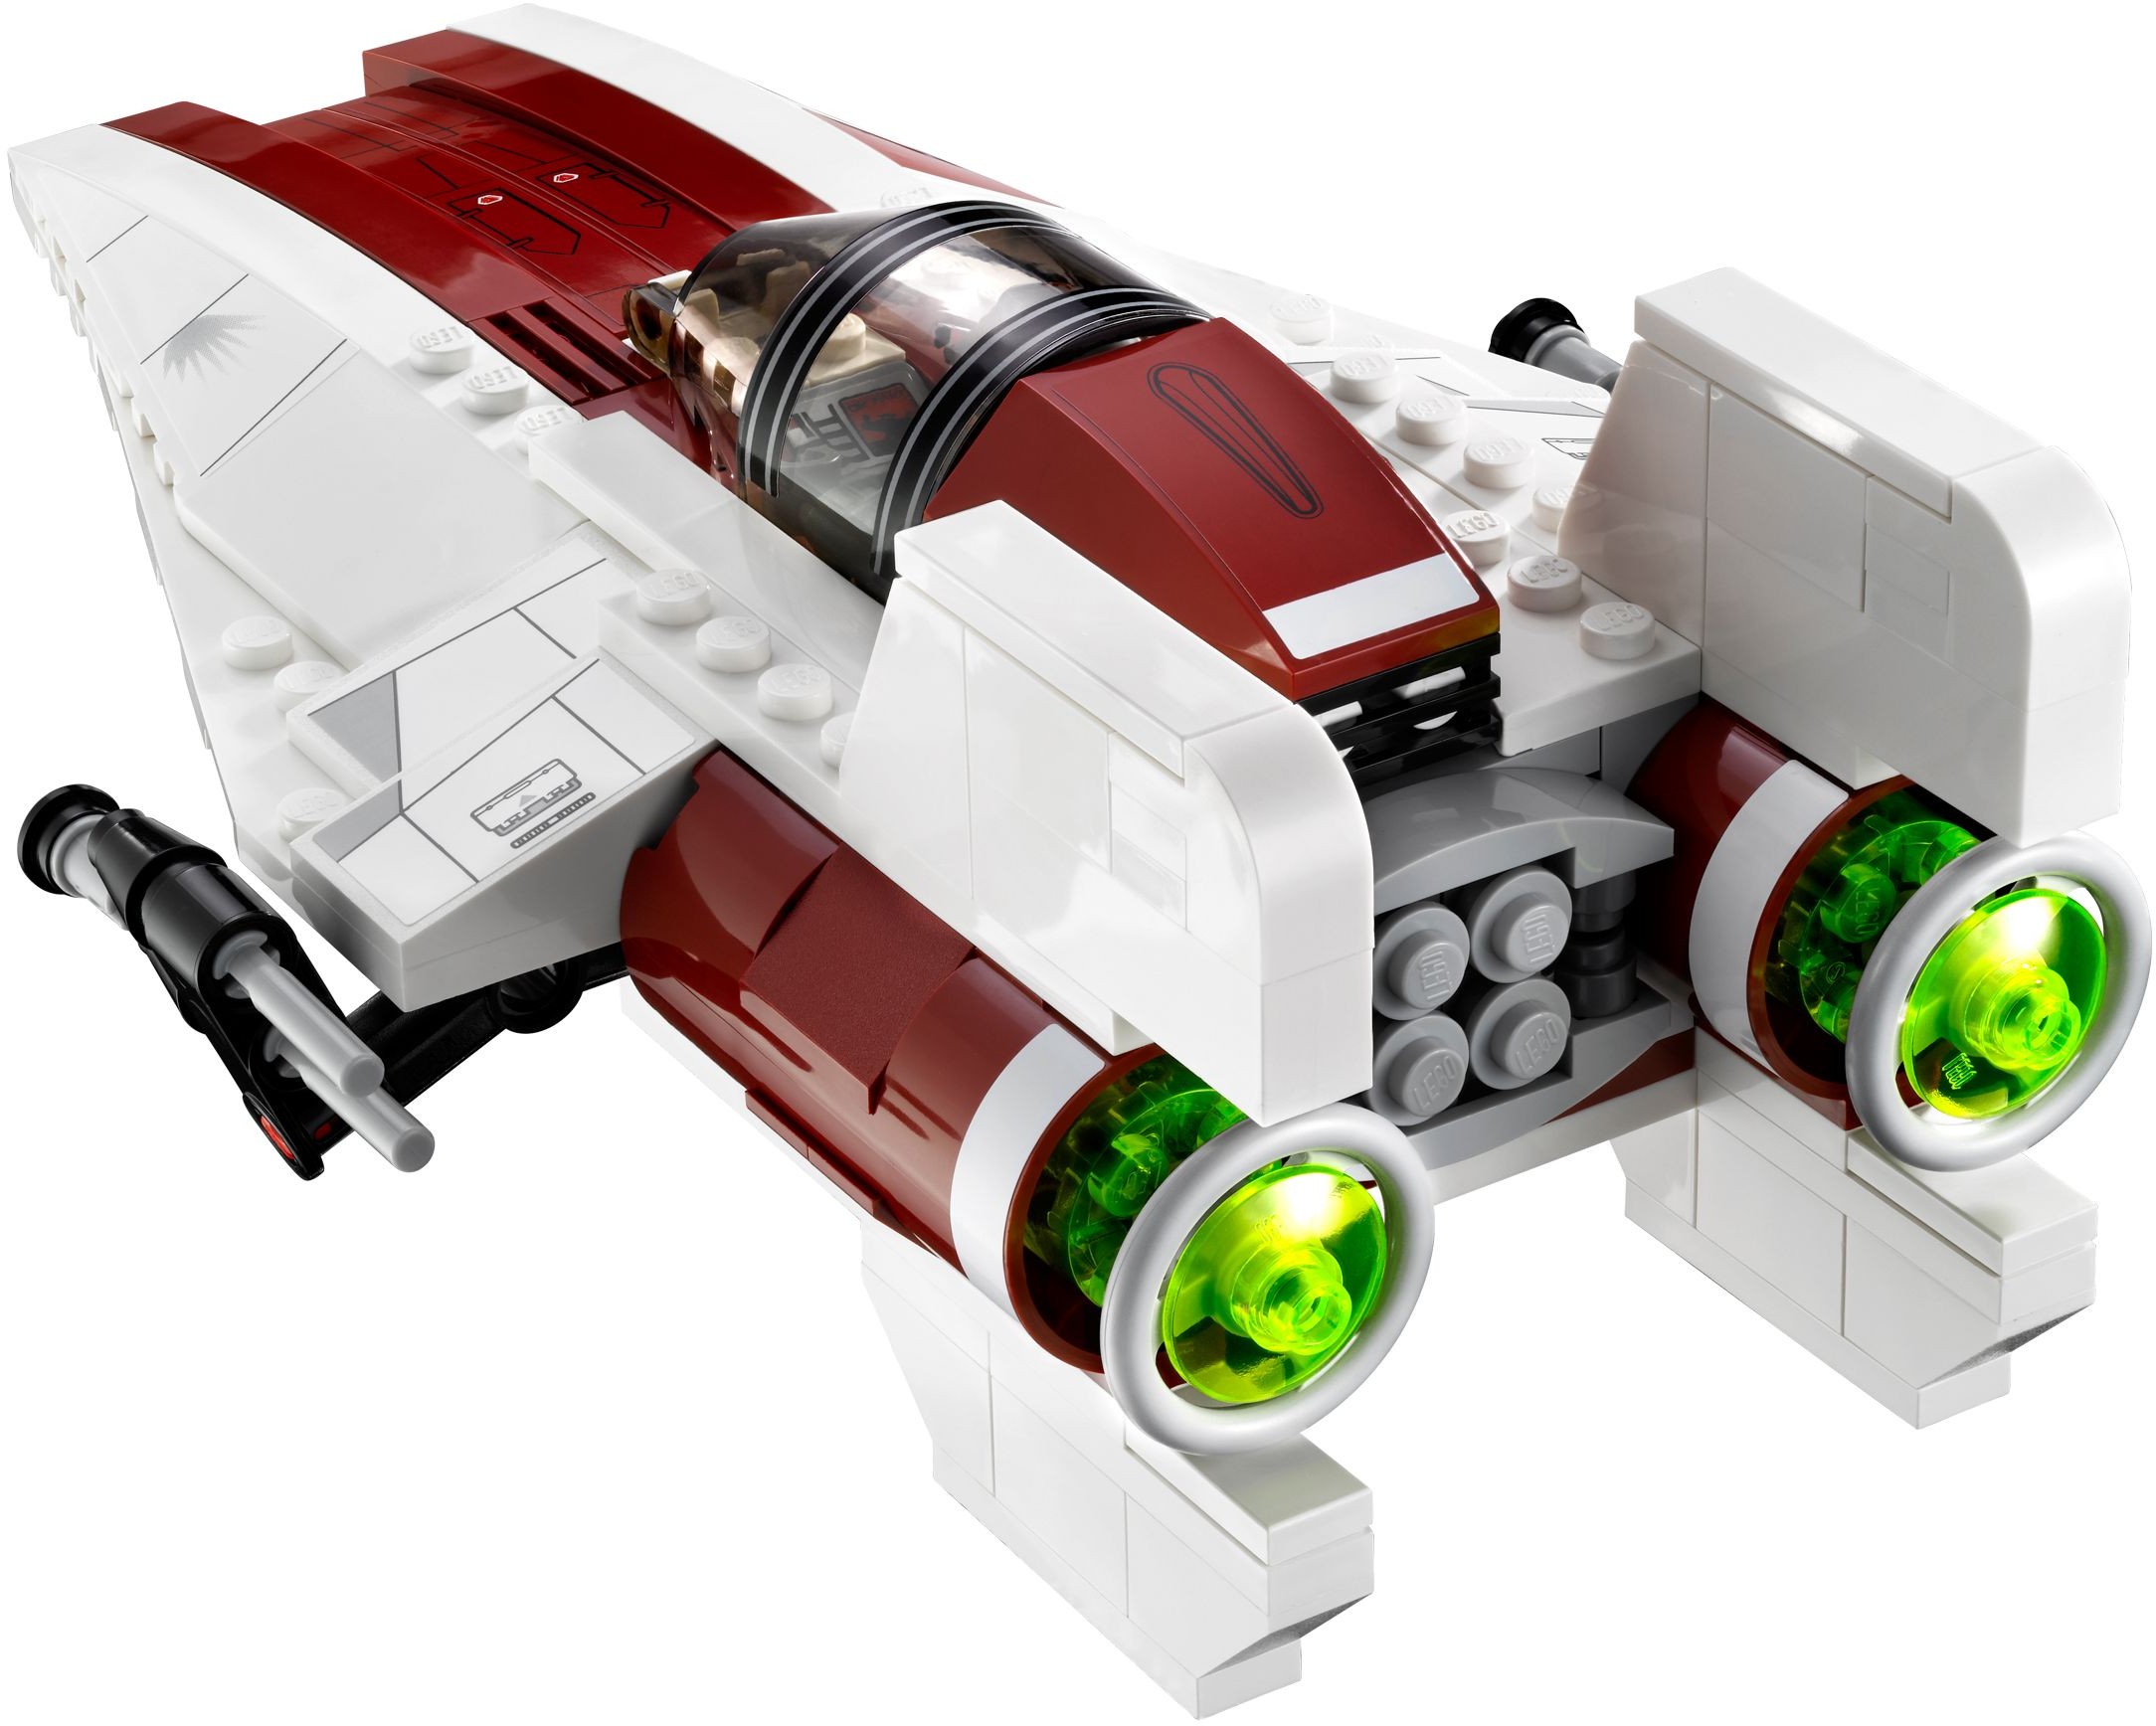 LEGO Star Wars A-wing Starfighter for sale online 75003 